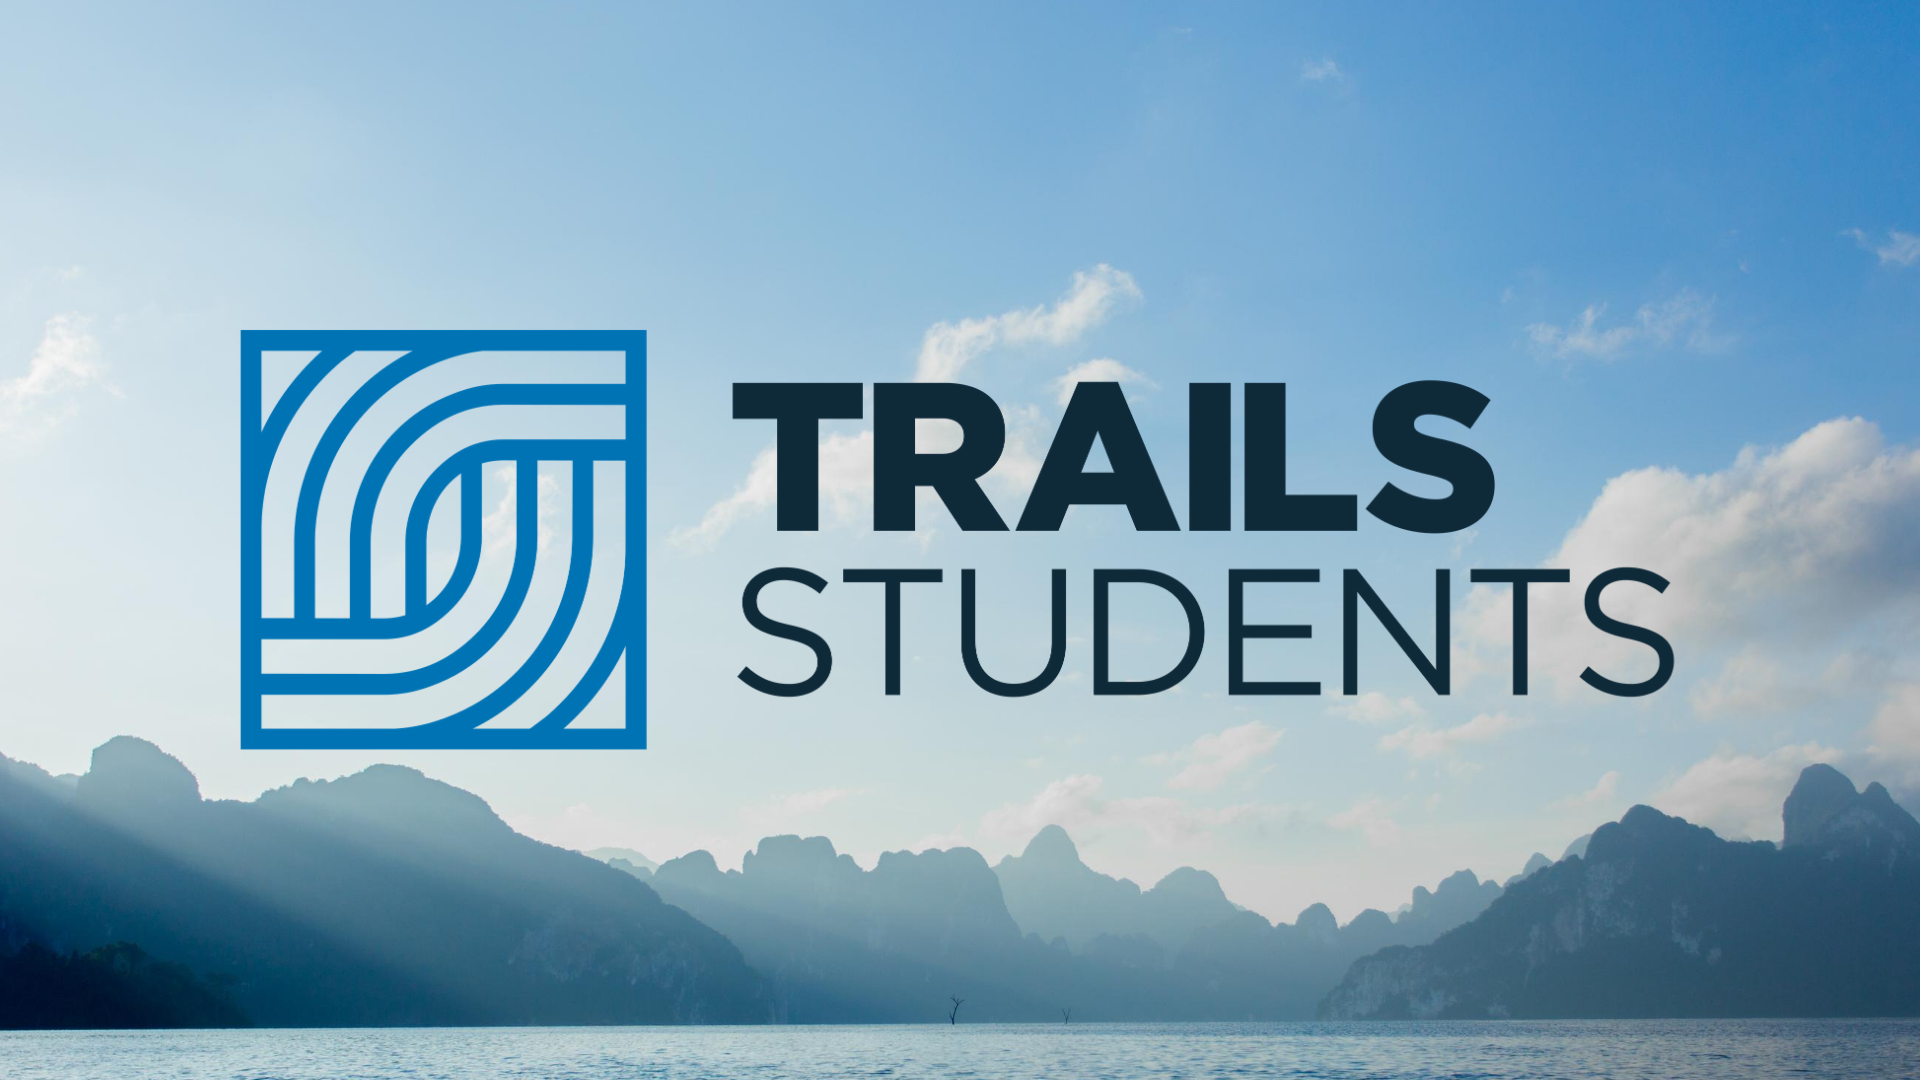 Trails Students Spring 2021 image